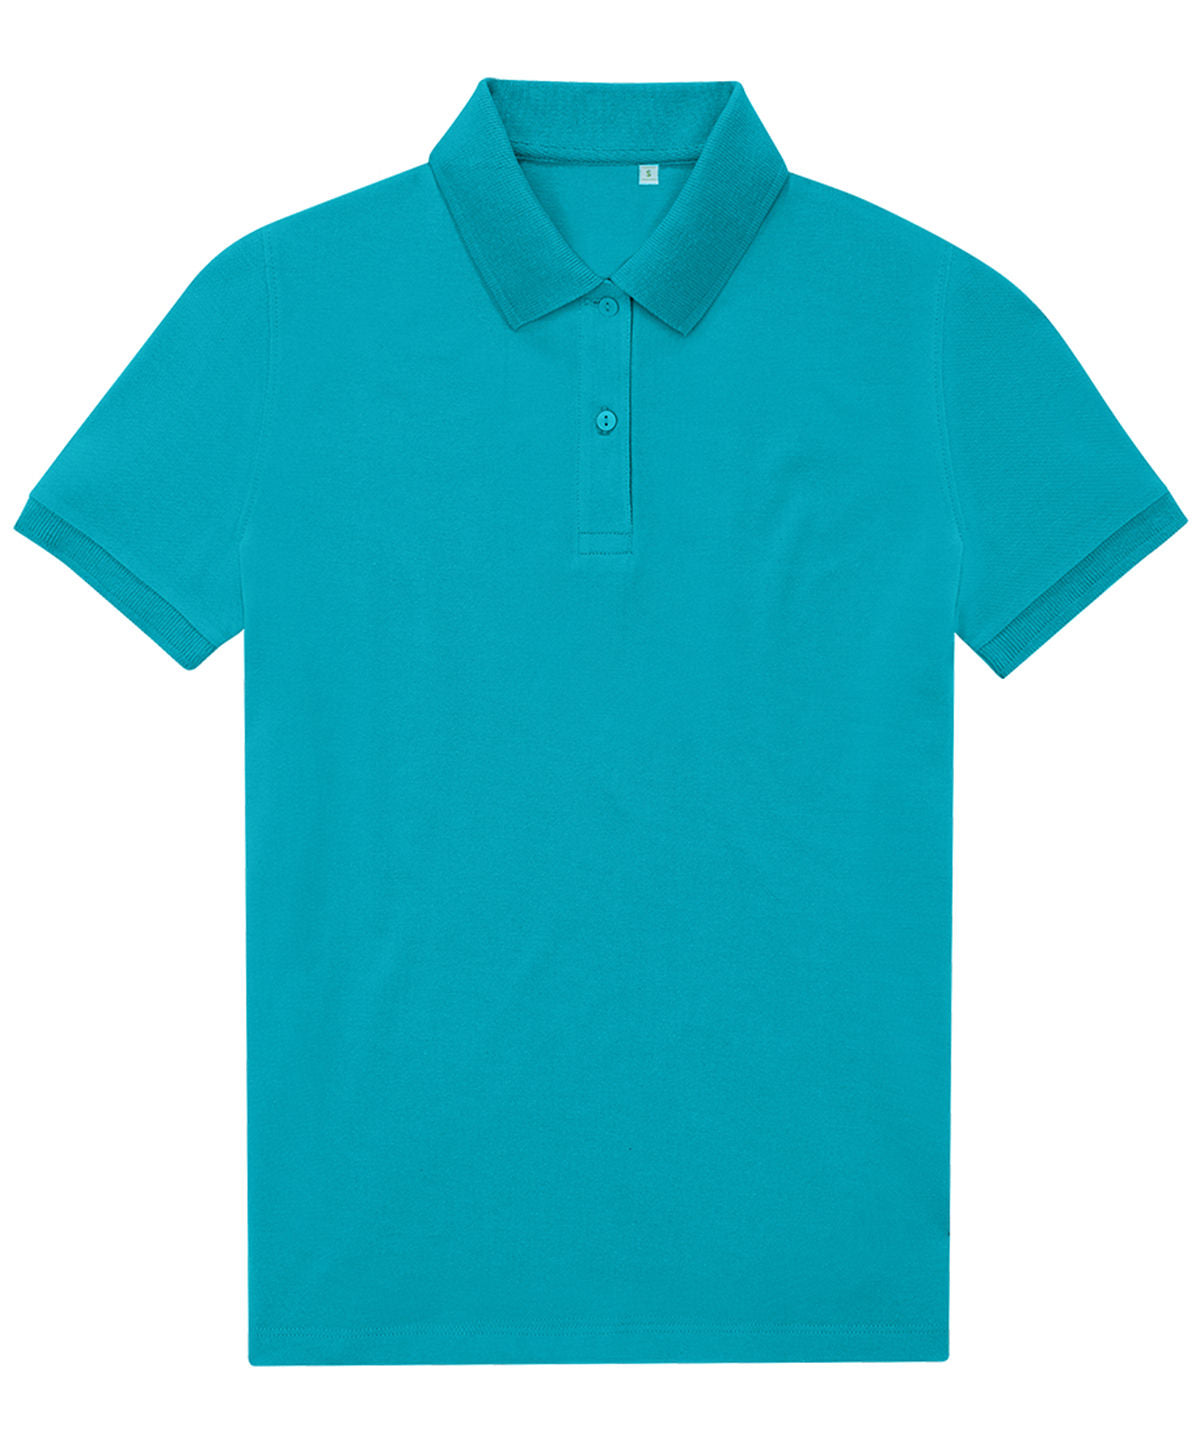 B&C Collection My Eco Polo 65/35 Women Pop Turquoise